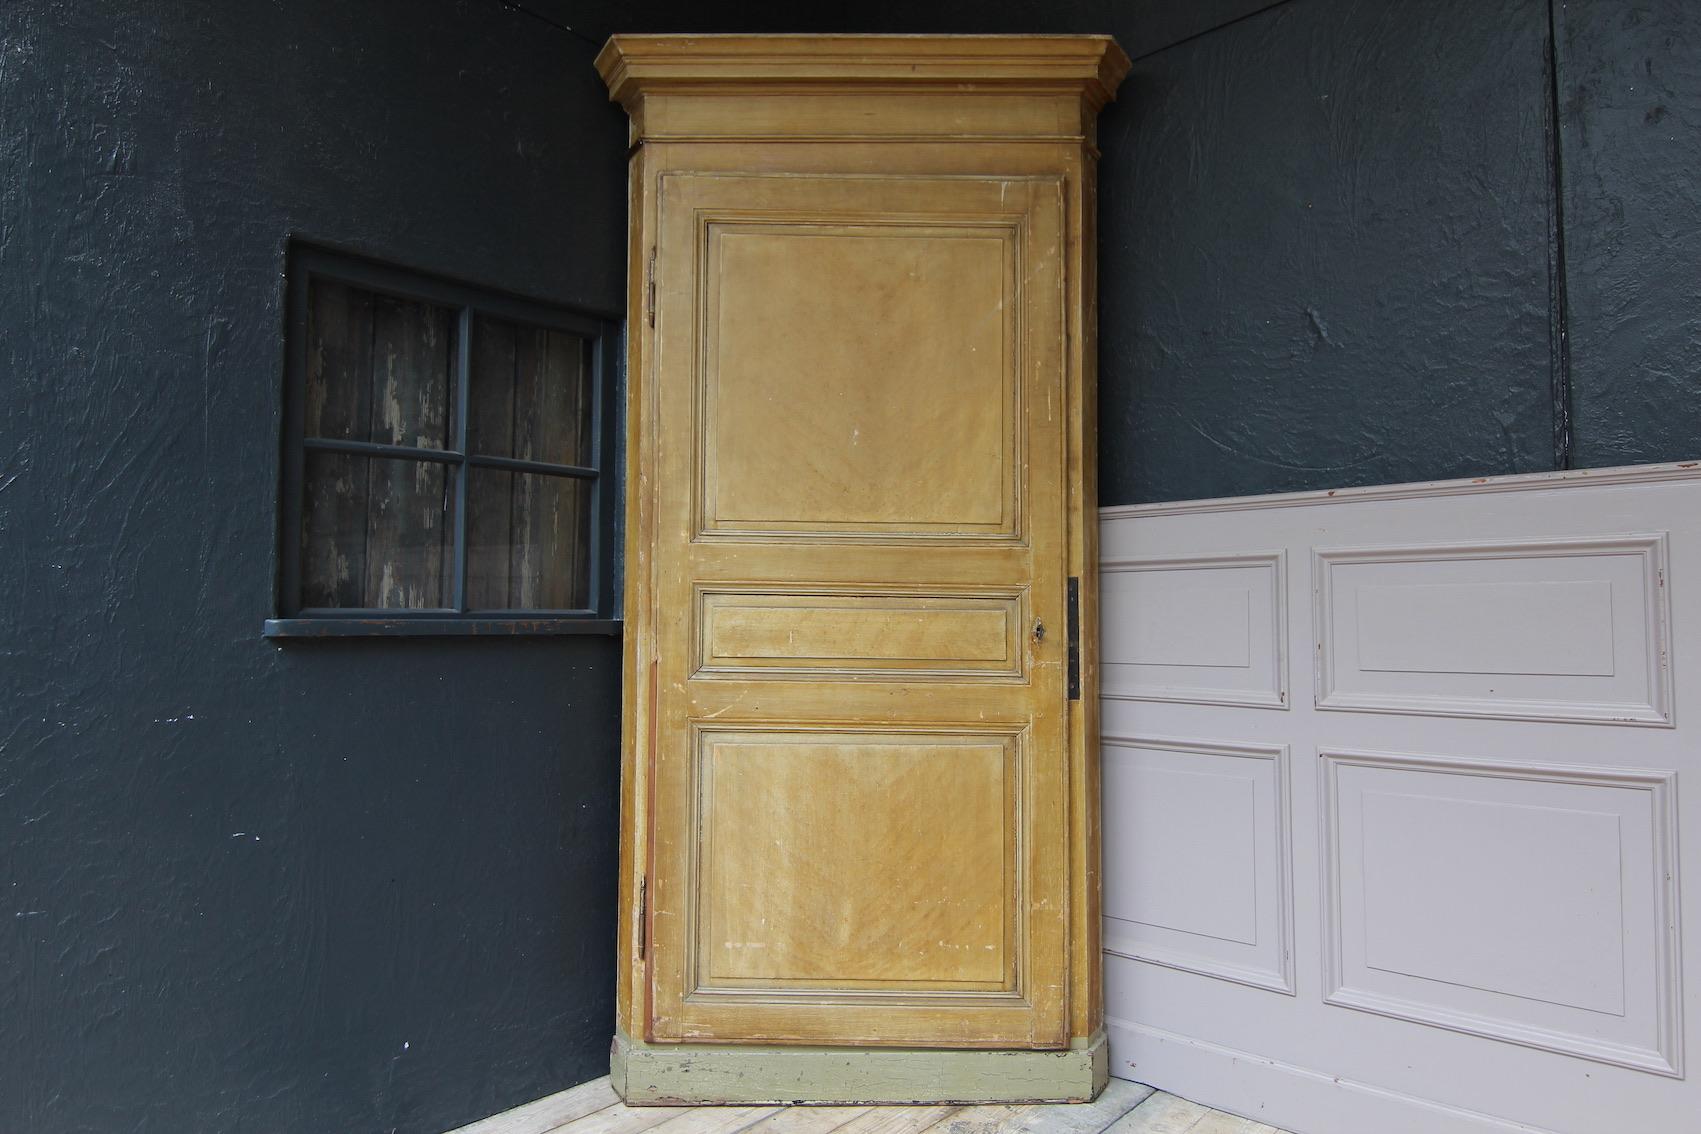 This beautiful 19th century piece of furniture from France was and is a corner cupboard, which was once plastered in the corner of the room. Now it has a new back wall and you can even move it.
The original paint of the cabinet gives a stunningly